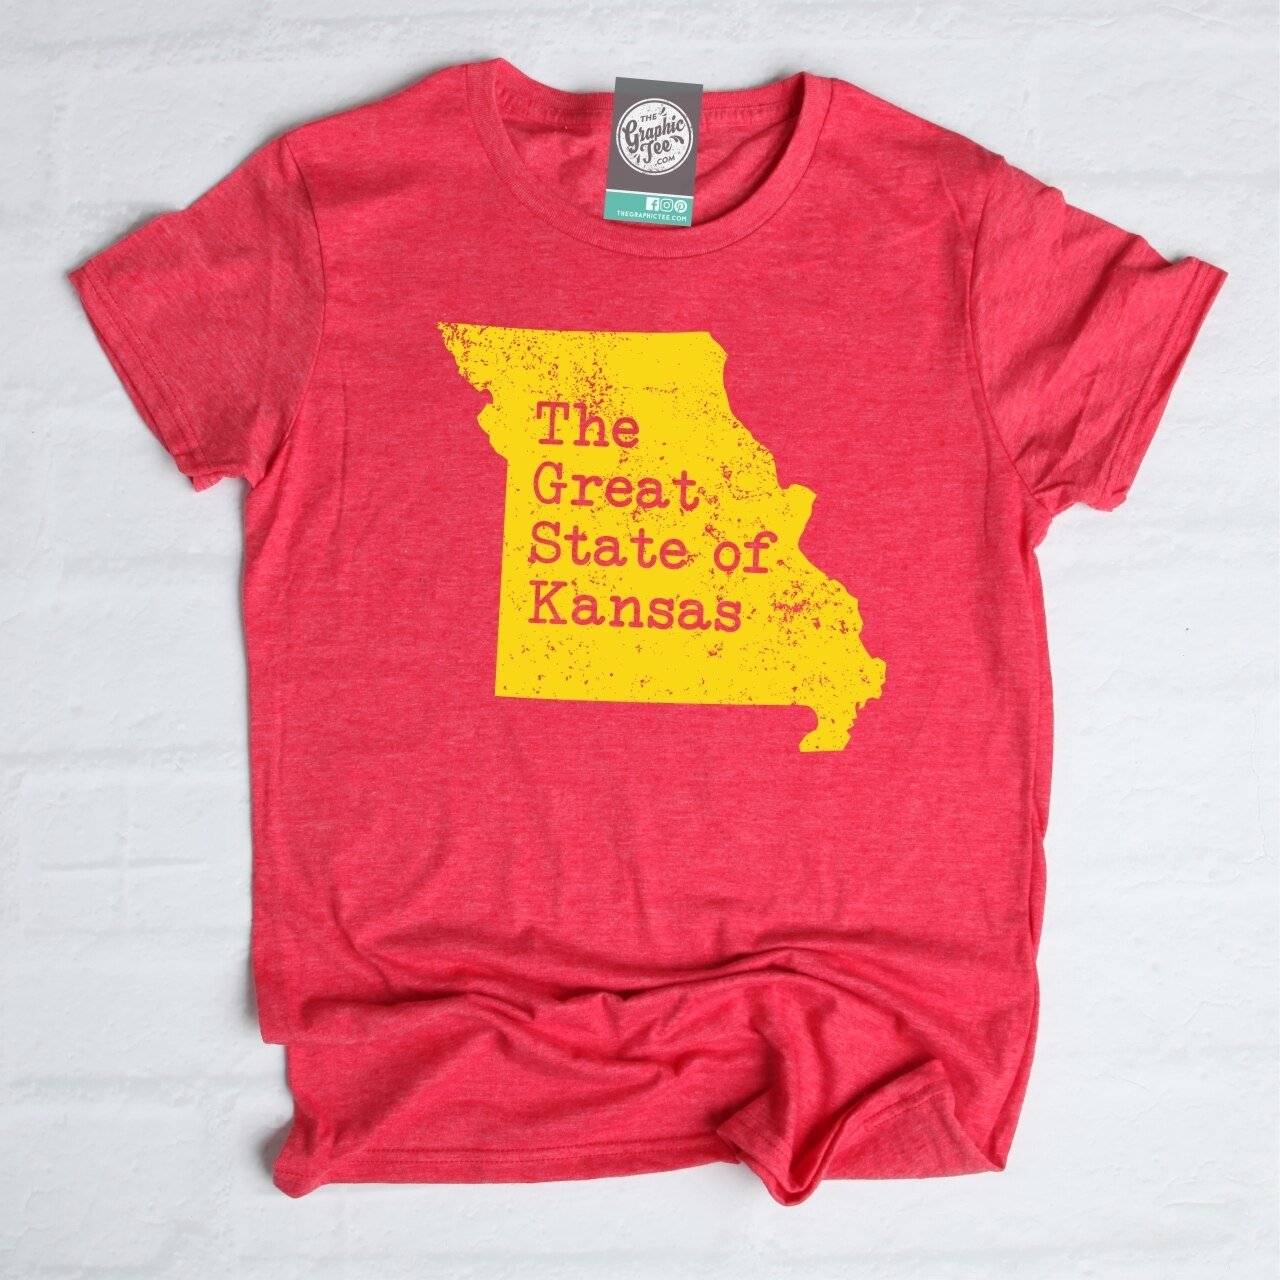 The Great State of Kansas - Unisex Tee - The Graphic Tee